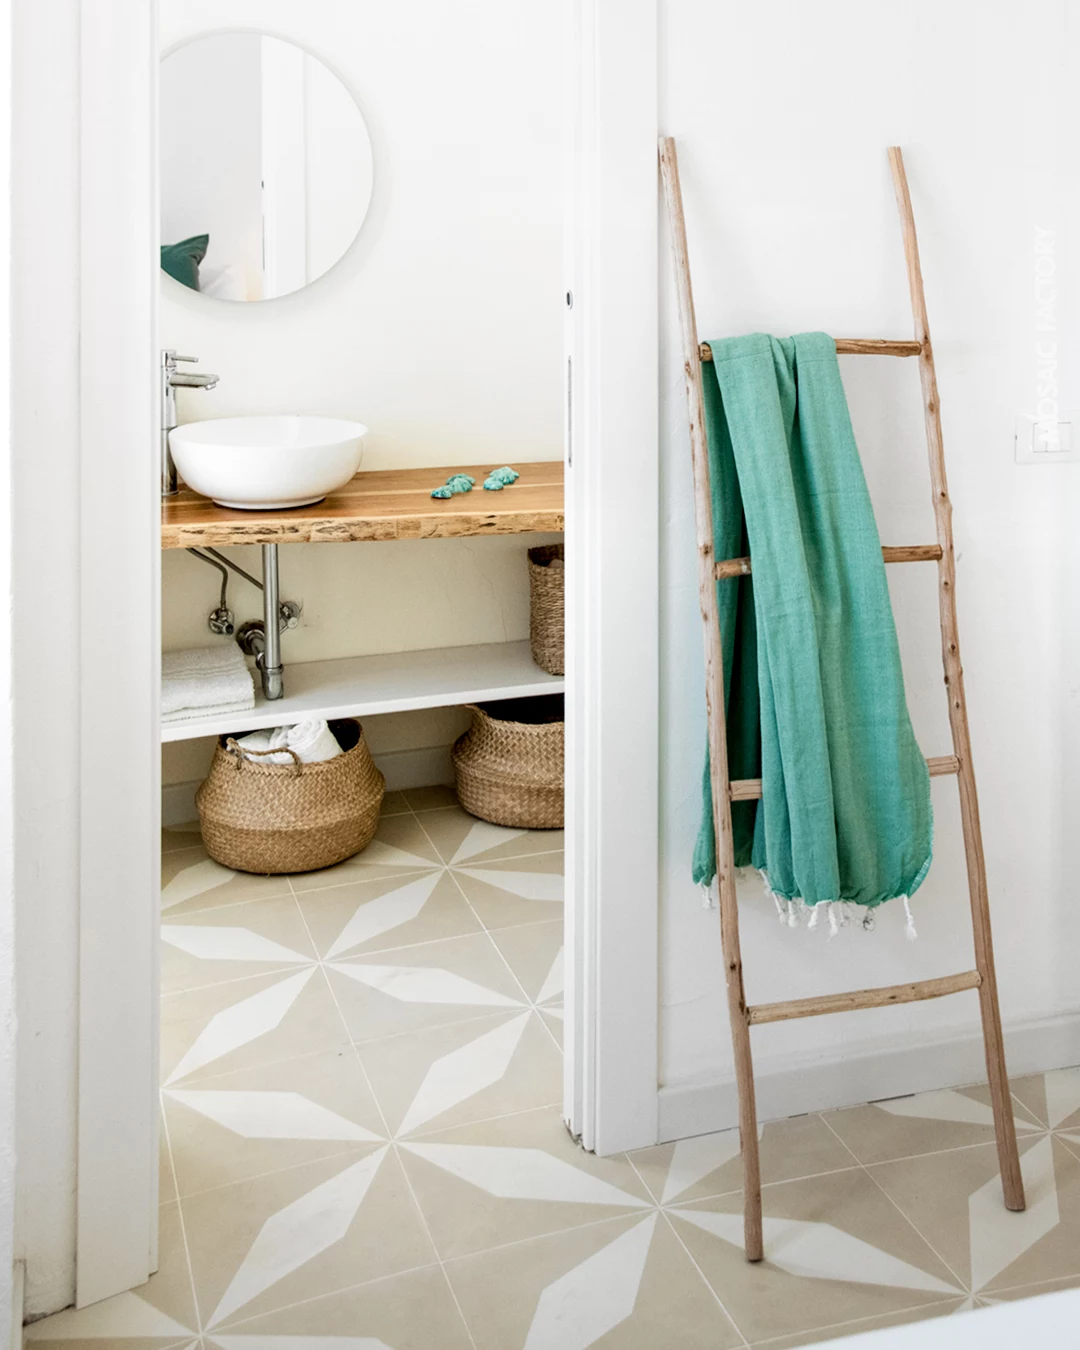 Bathroom cement tiles for designer projects